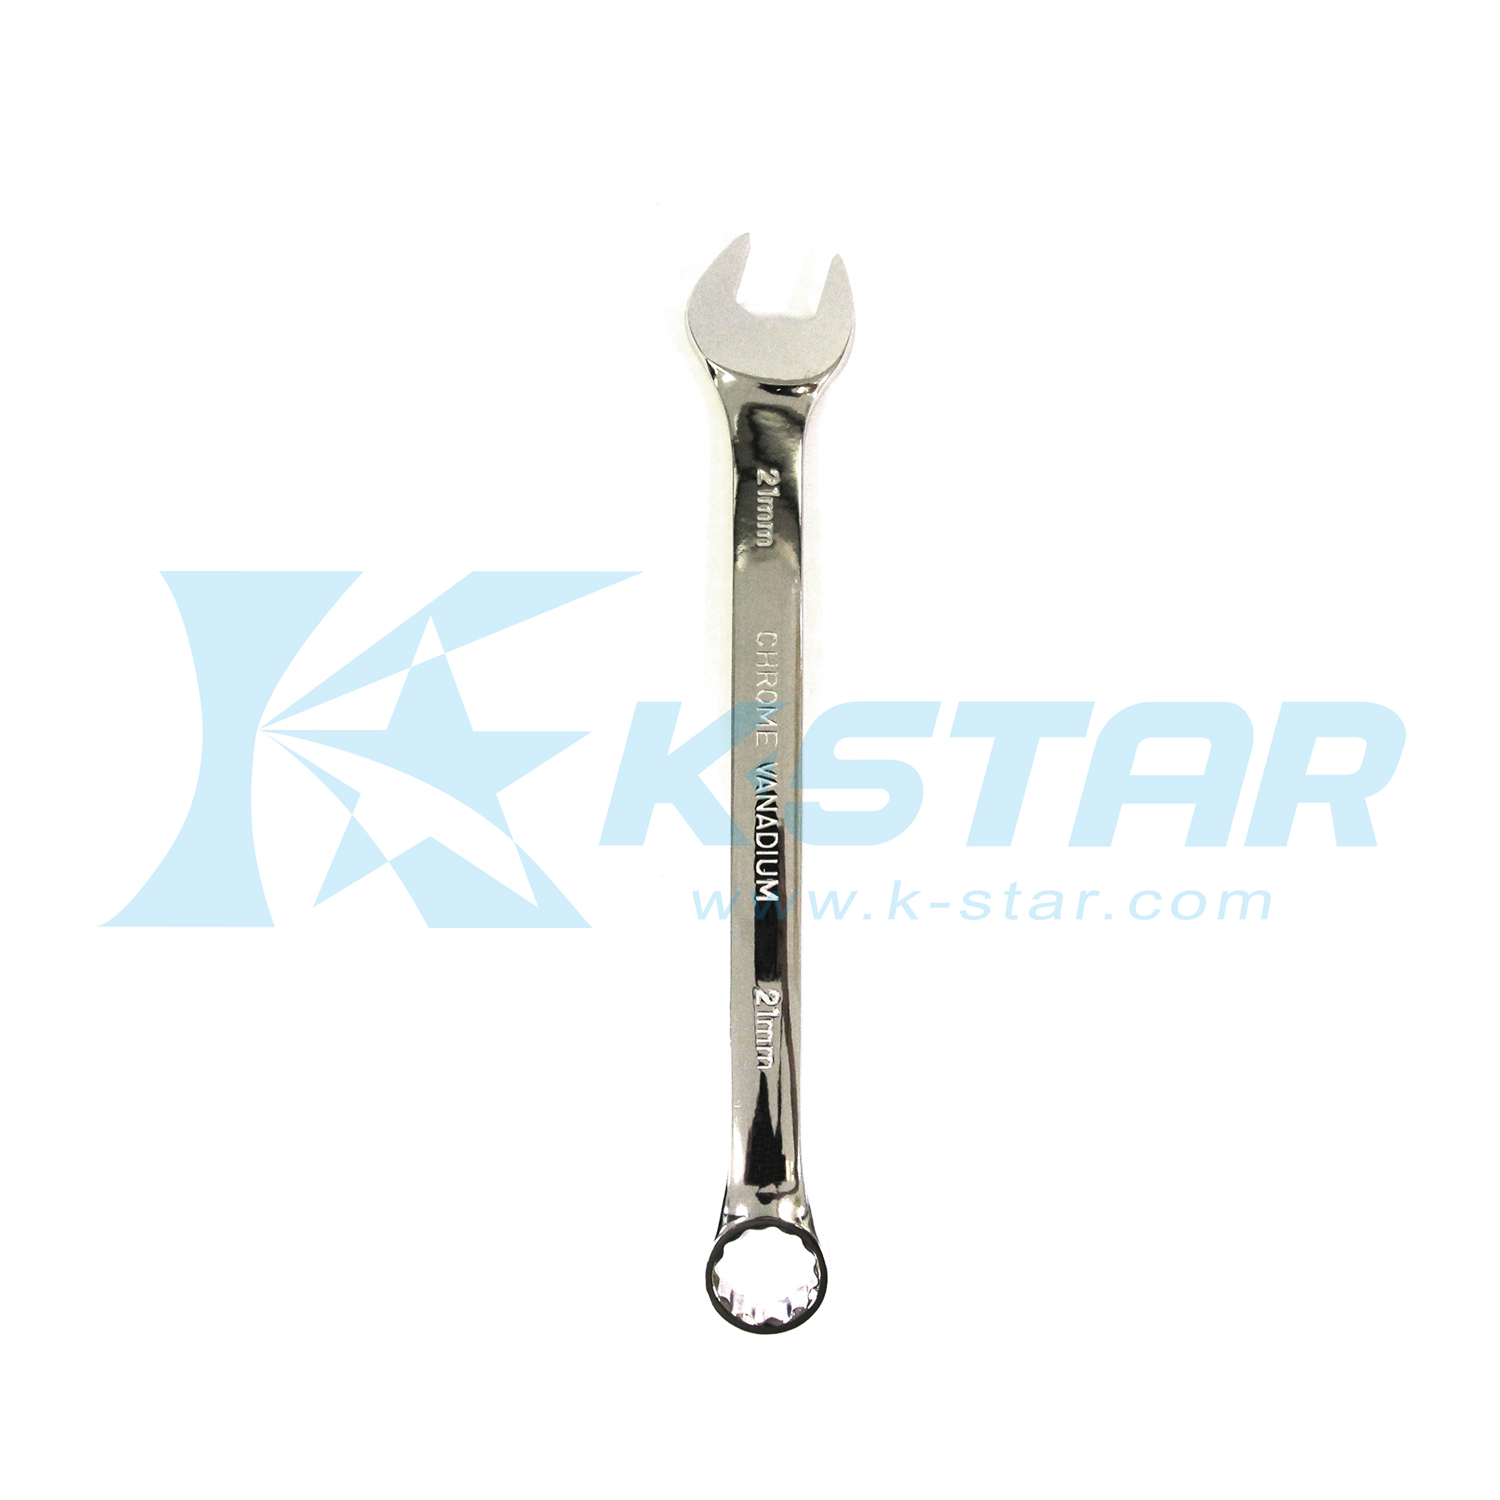 PR COMBINATION WRENCH 13/16"